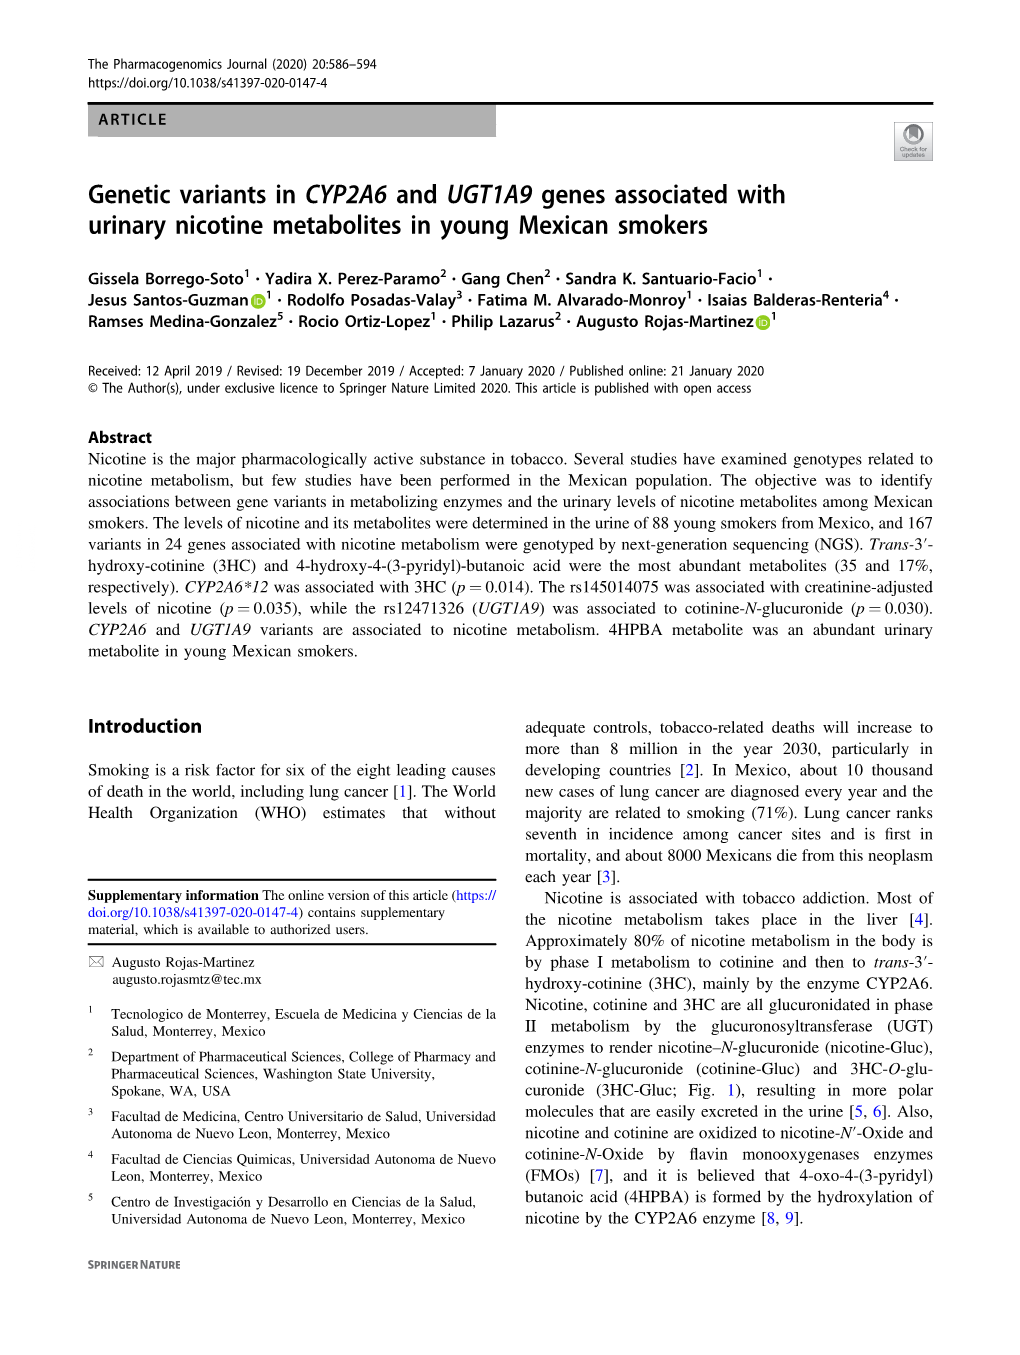 Genetic Variants in CYP2A6 and UGT1A9 Genes Associated with Urinary Nicotine Metabolites in Young Mexican Smokers